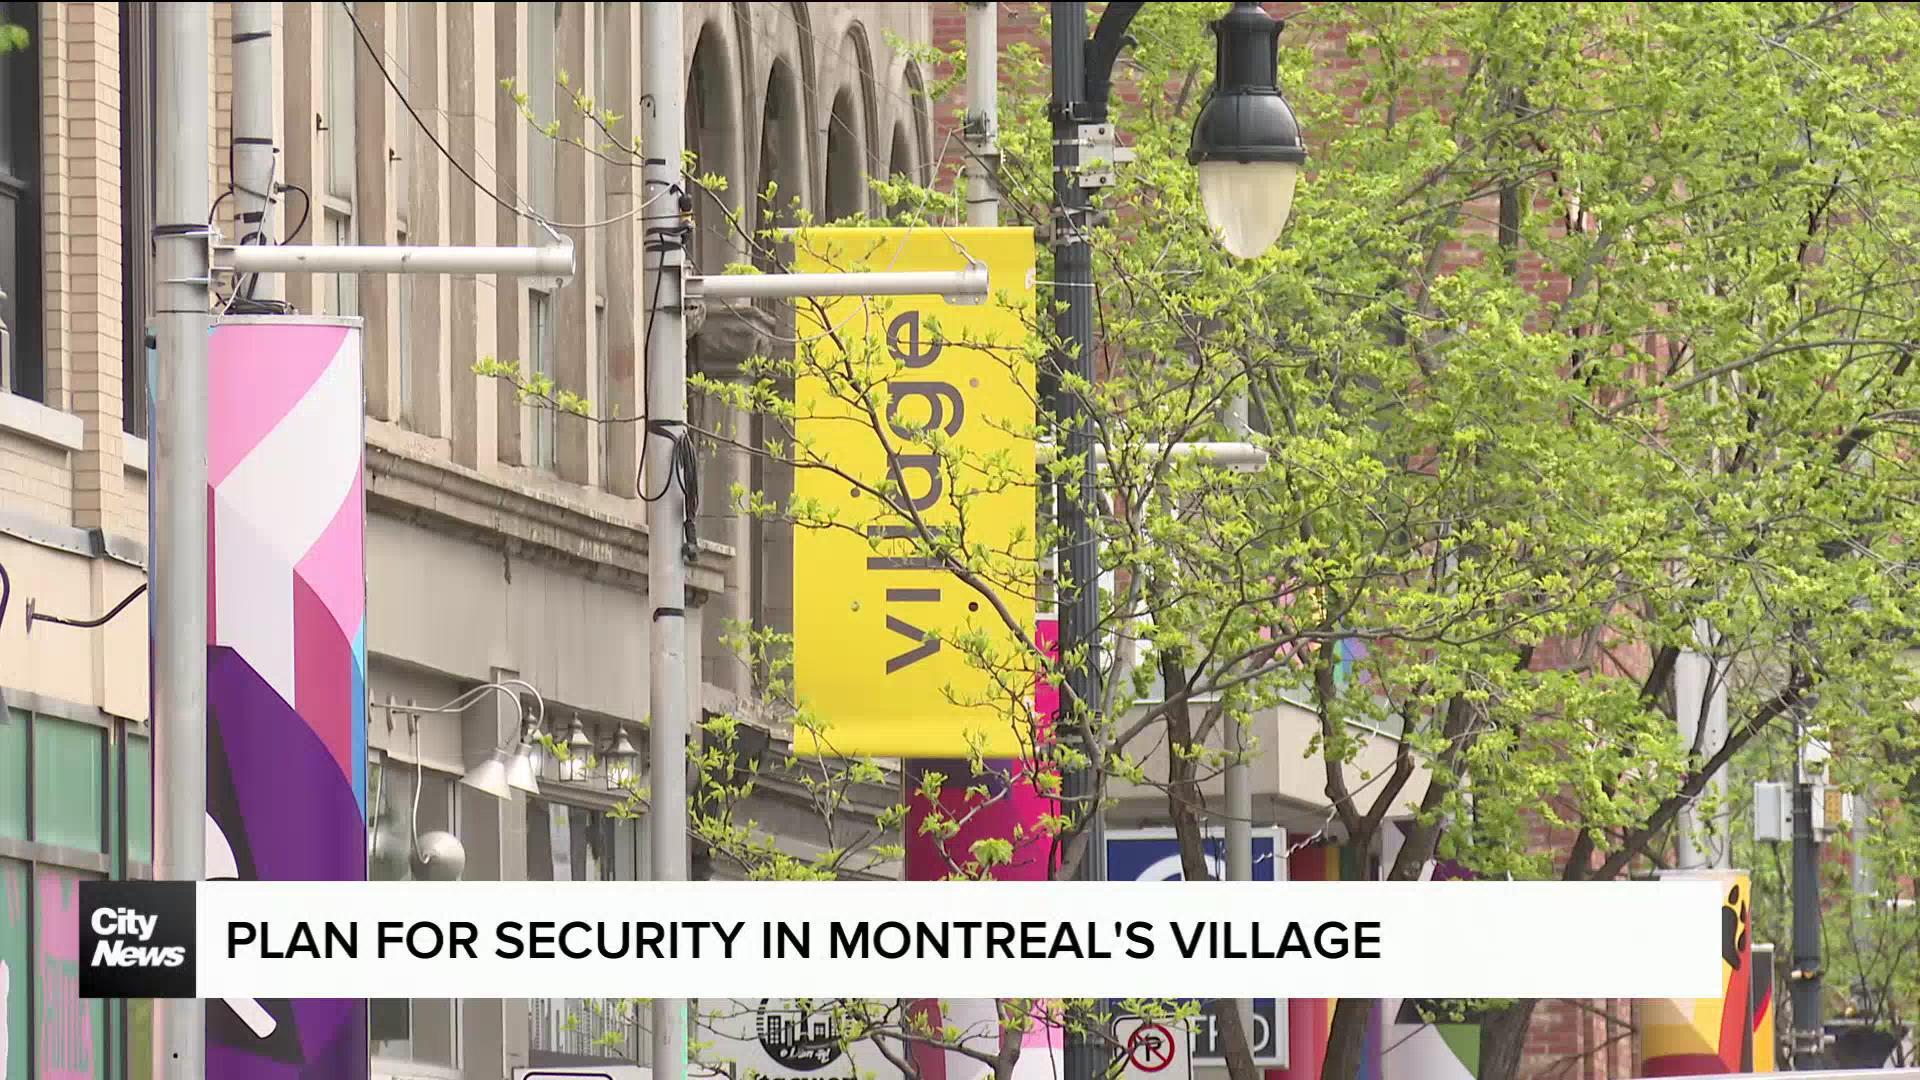 Residents of Montreal's Village continue to face safety concerns